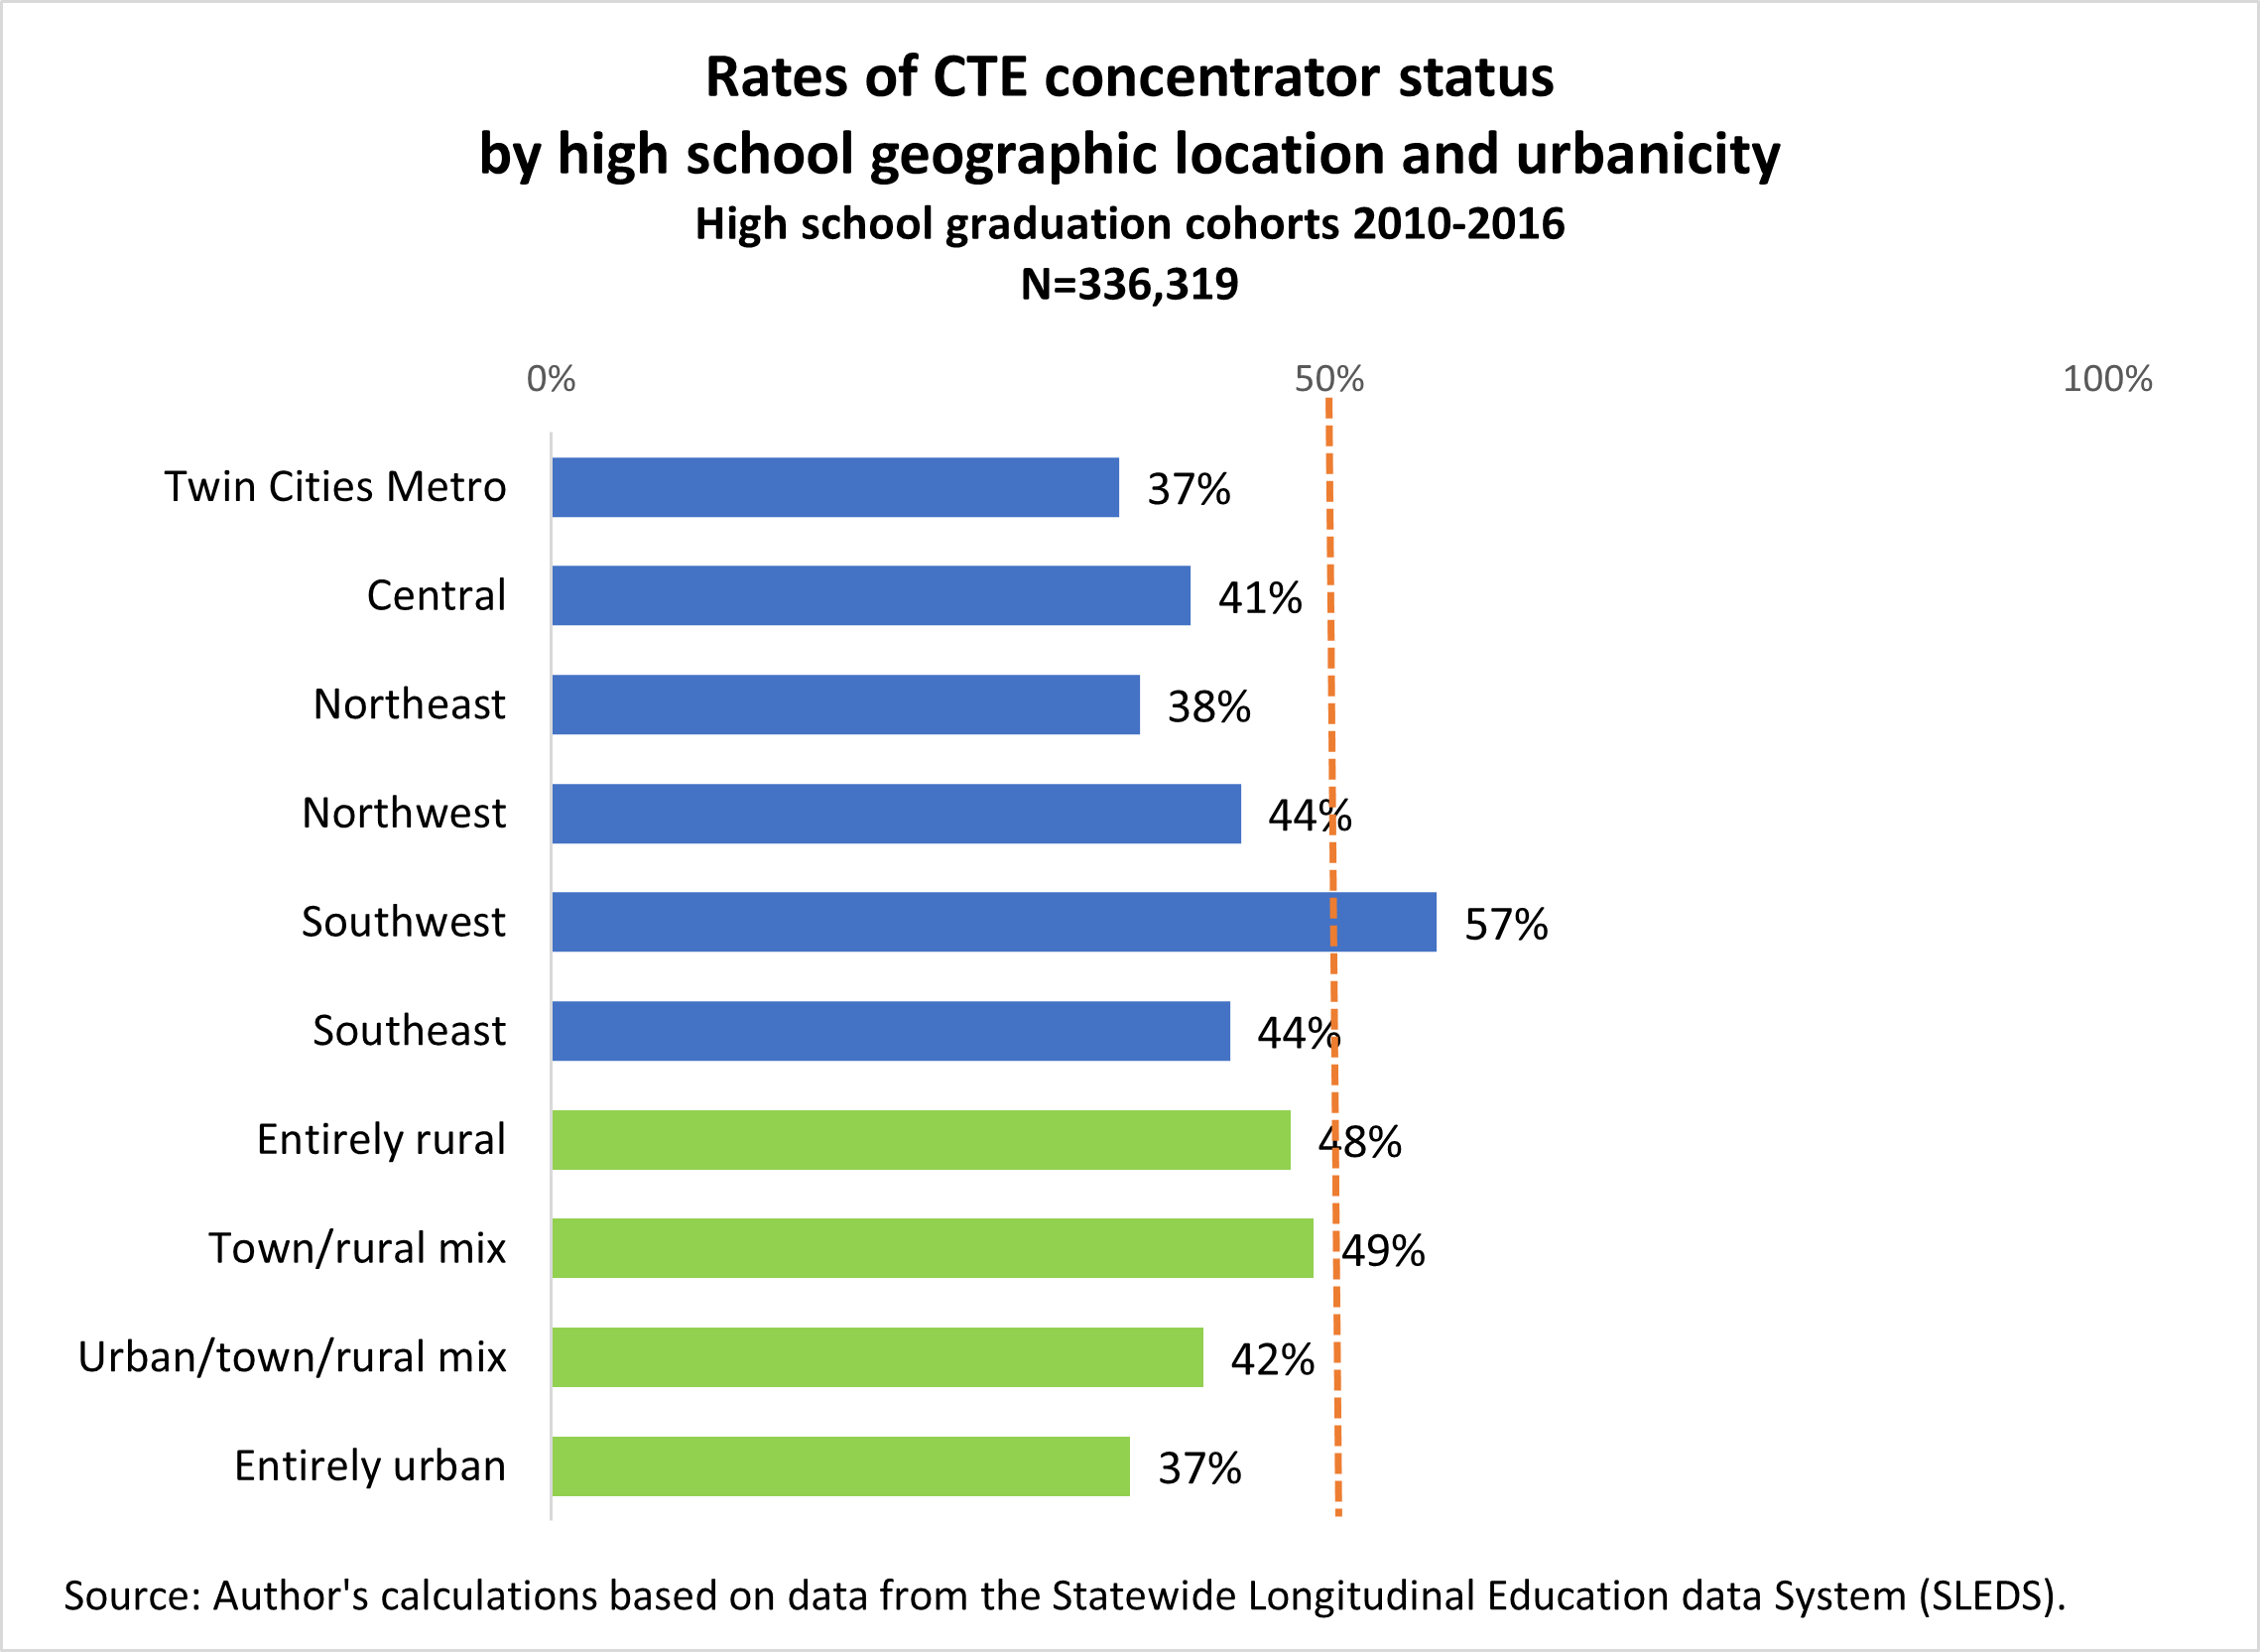 rates of CTE Concentrator status by high school geographic location and urbanicity